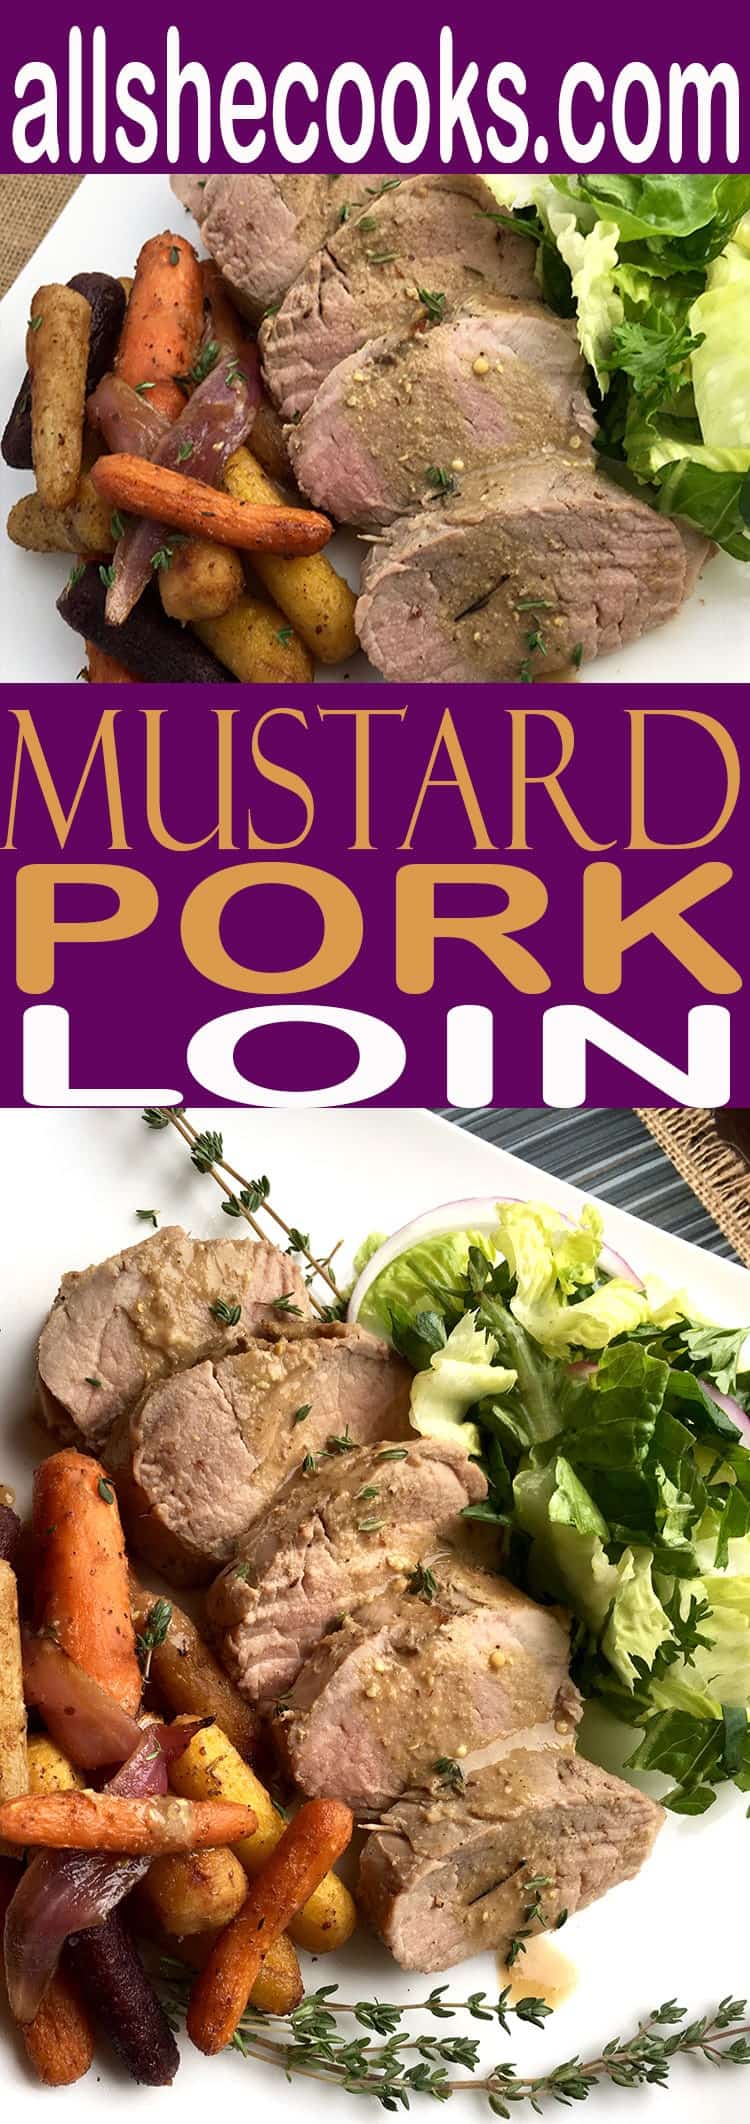 Learn how to make a tender mustard pork loin with mustard seasoning that is so flavorful and delicious. This tender pork loin is a perfect dinner recipe.